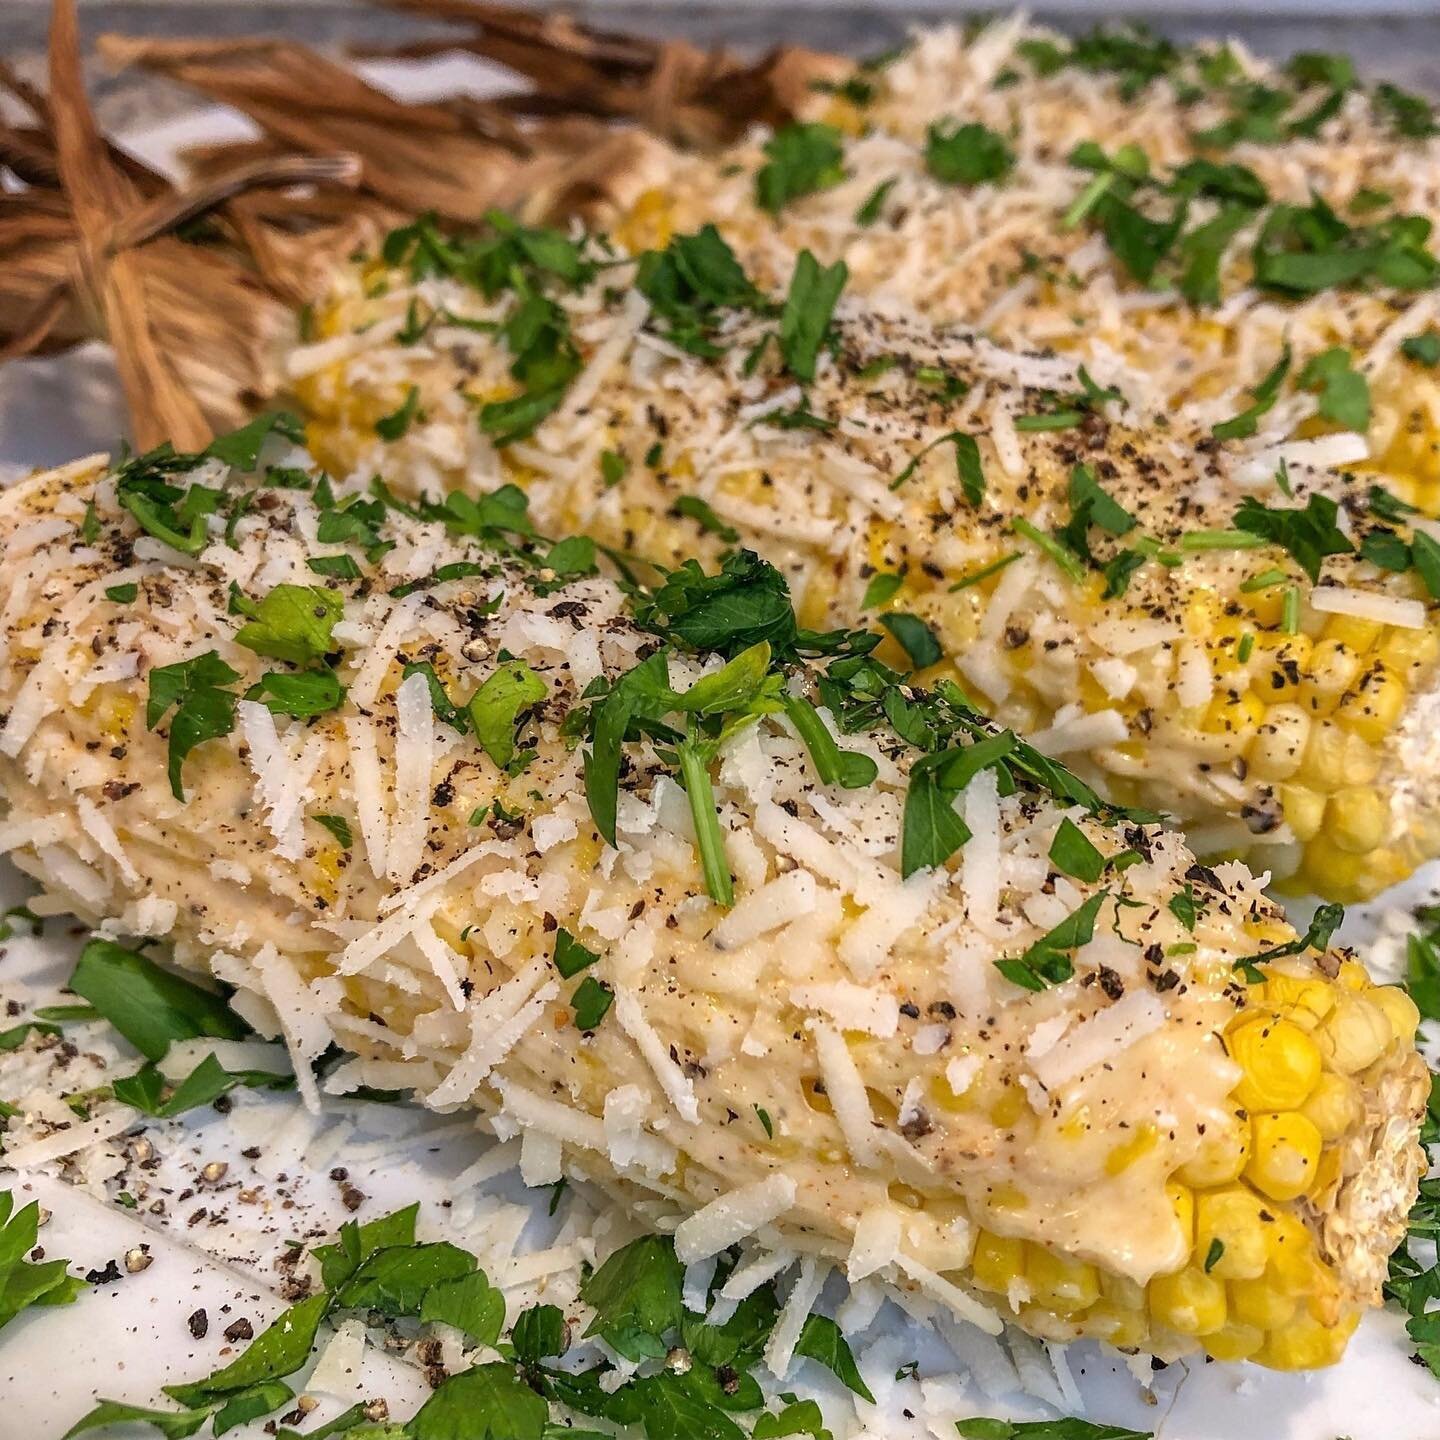 Pecorino Romano + freshly cracked black pepper = 💛 If &ldquo;Italian&rdquo; Street Corn was a thing&hellip;It could be something like this.🌽 

👩🏻&zwj;🍳Click the link in my profile bio for the full recipe!⁠

🌽All you need is:
- 4 ears of yellow 